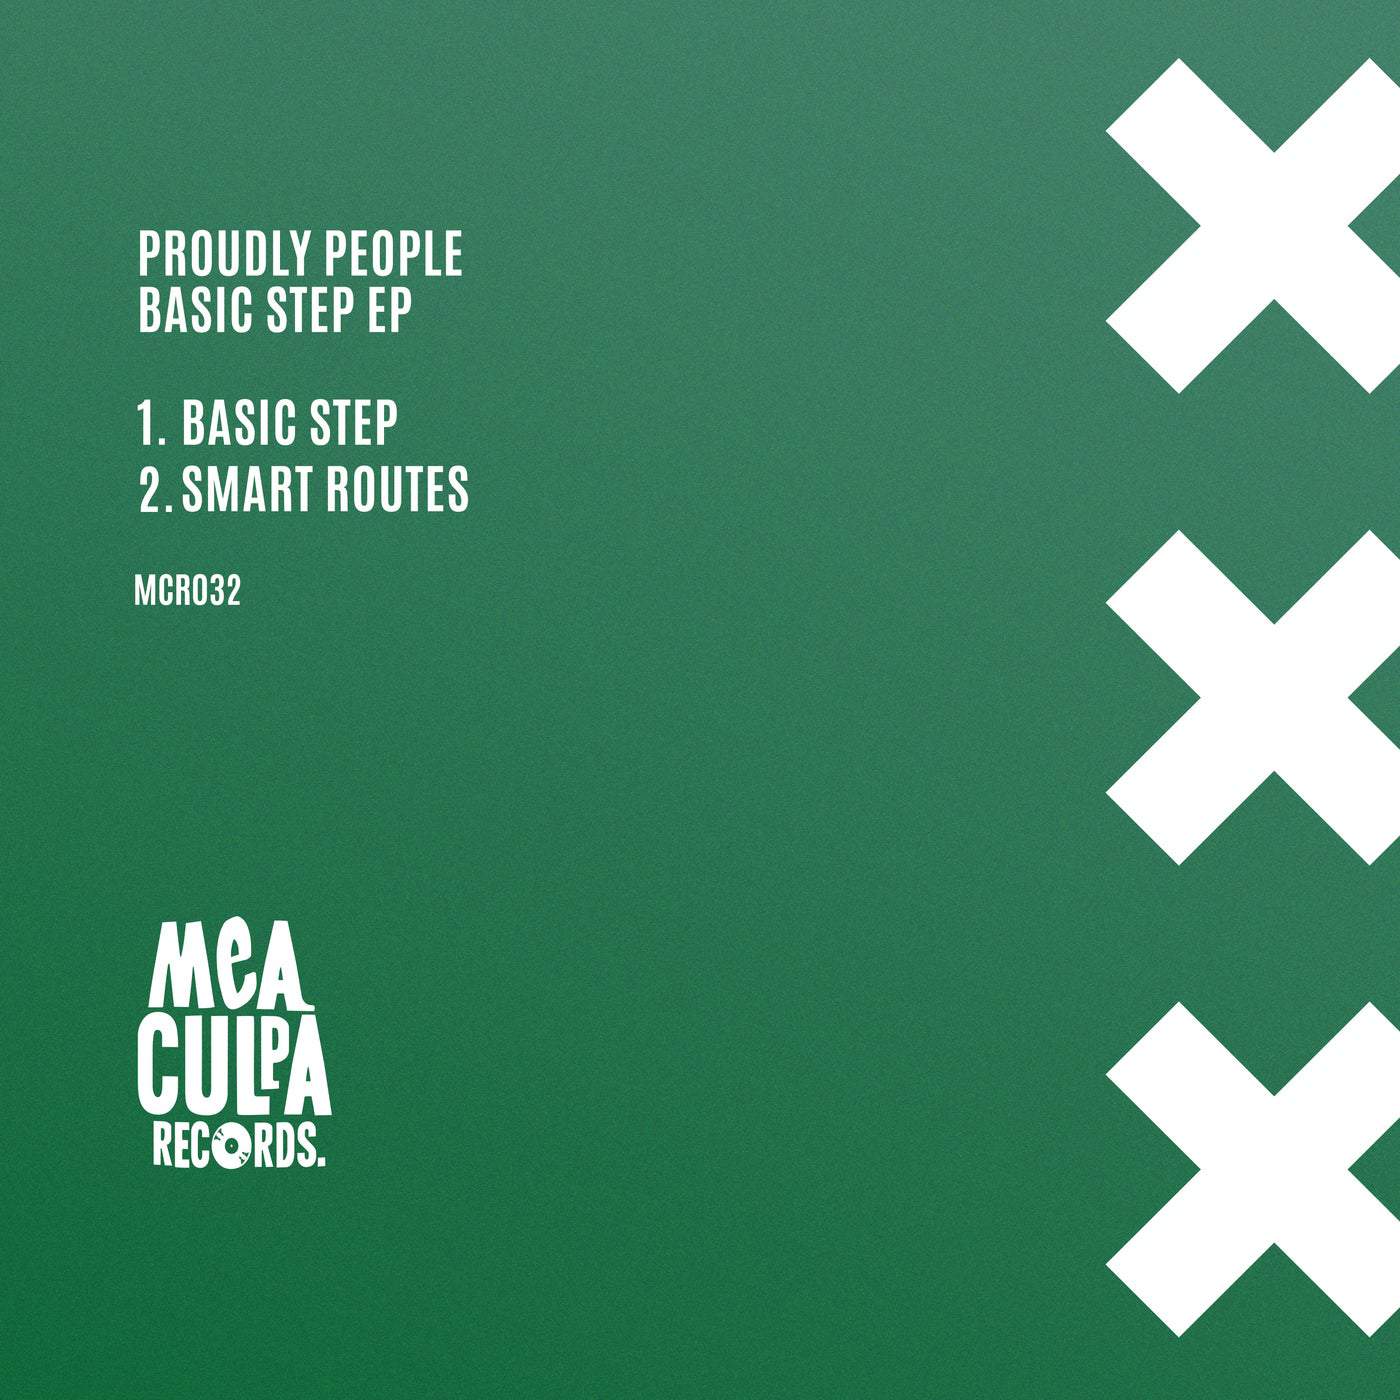 image cover: Basic Step EP by Proudly People on Mea Culpa Records